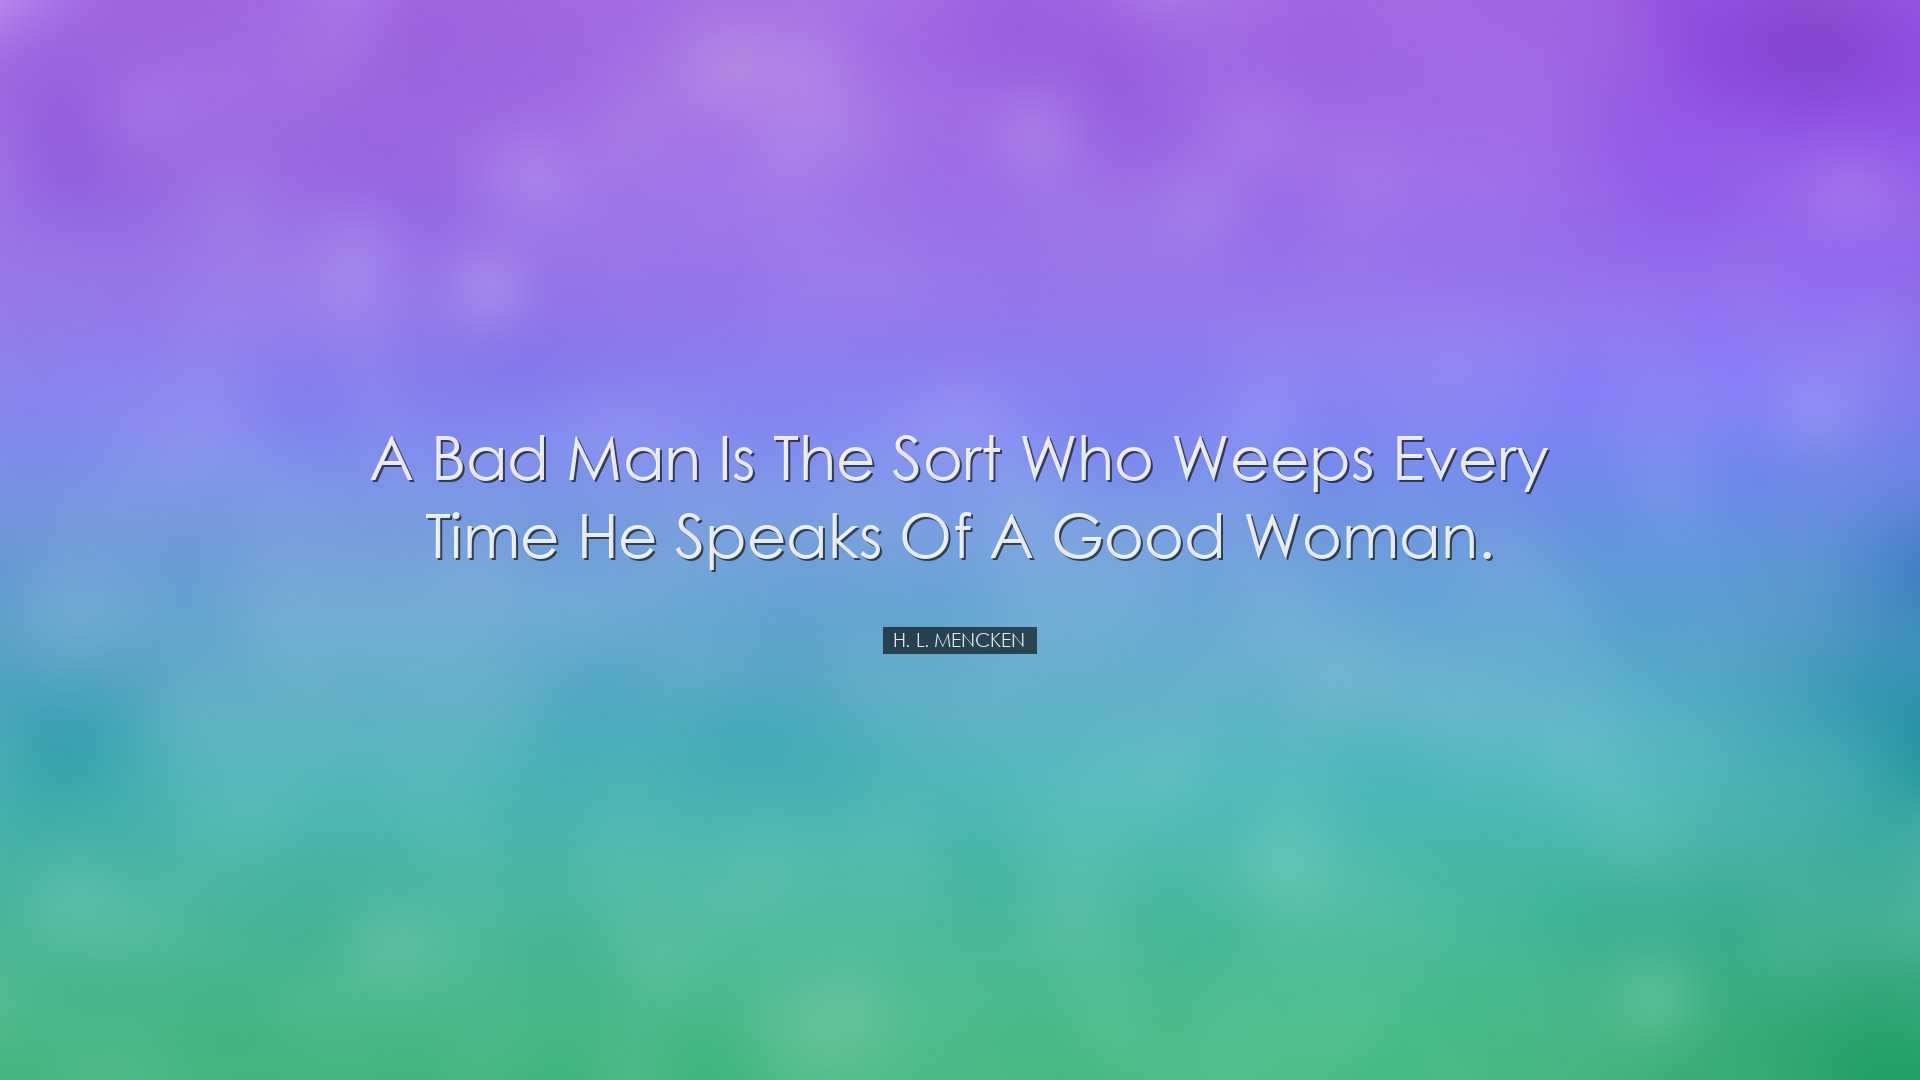 A bad man is the sort who weeps every time he speaks of a good wom